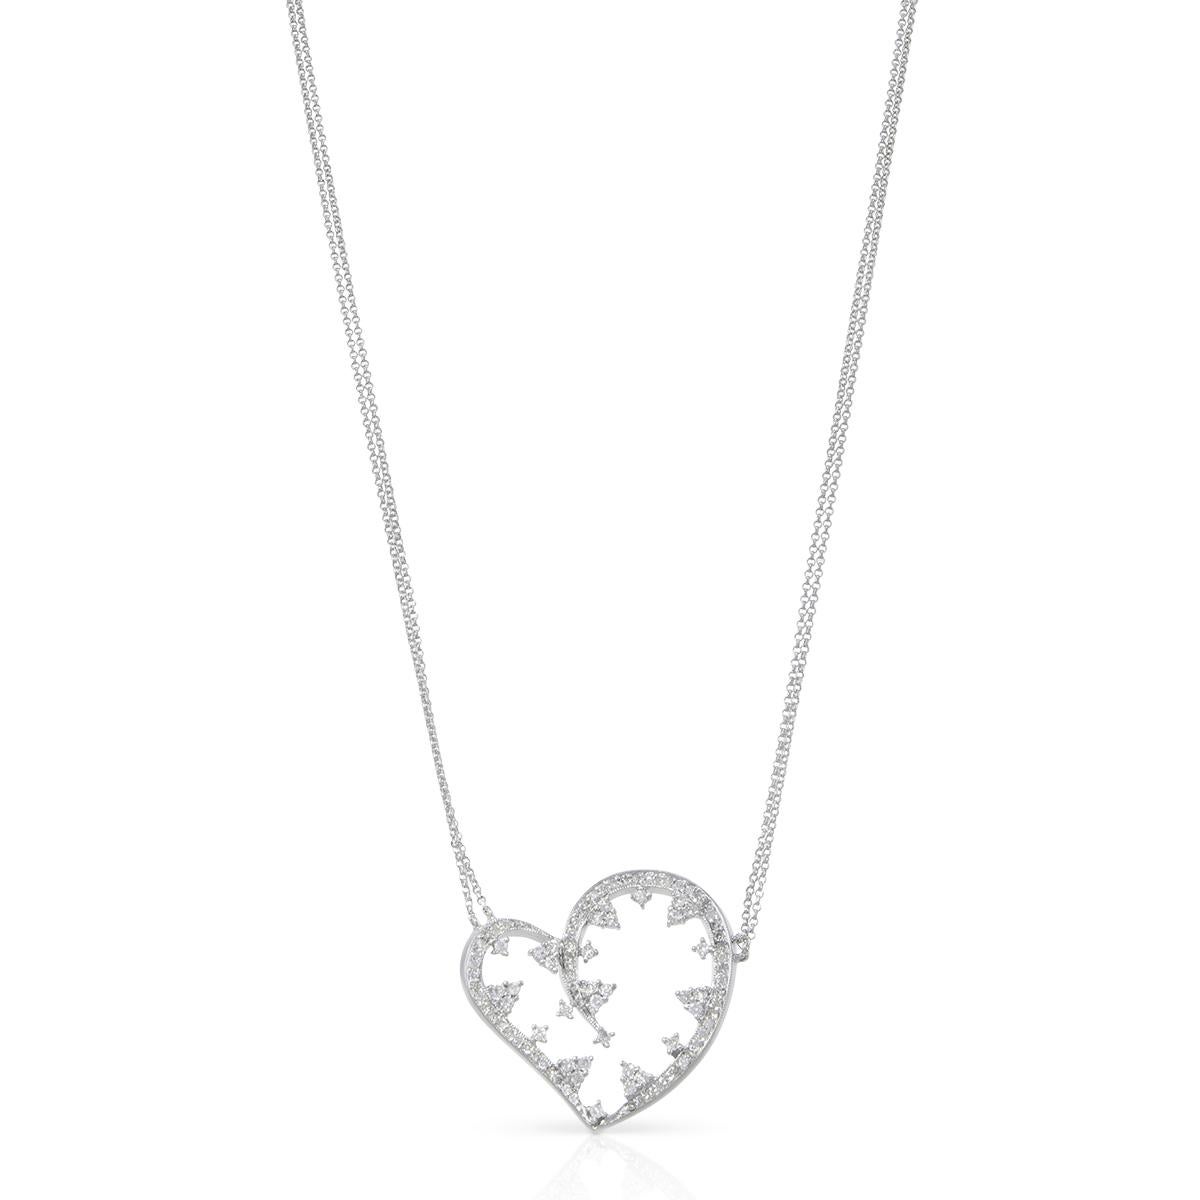 This classic natural diamond heart pendant showcases white sparkling round cut diamonds in a heart-shaped design. Each diamond is of SI1-SI2 clarity and G-H color. Total diamond weight: 1.50cts. This piece would make the perfect anniversary,